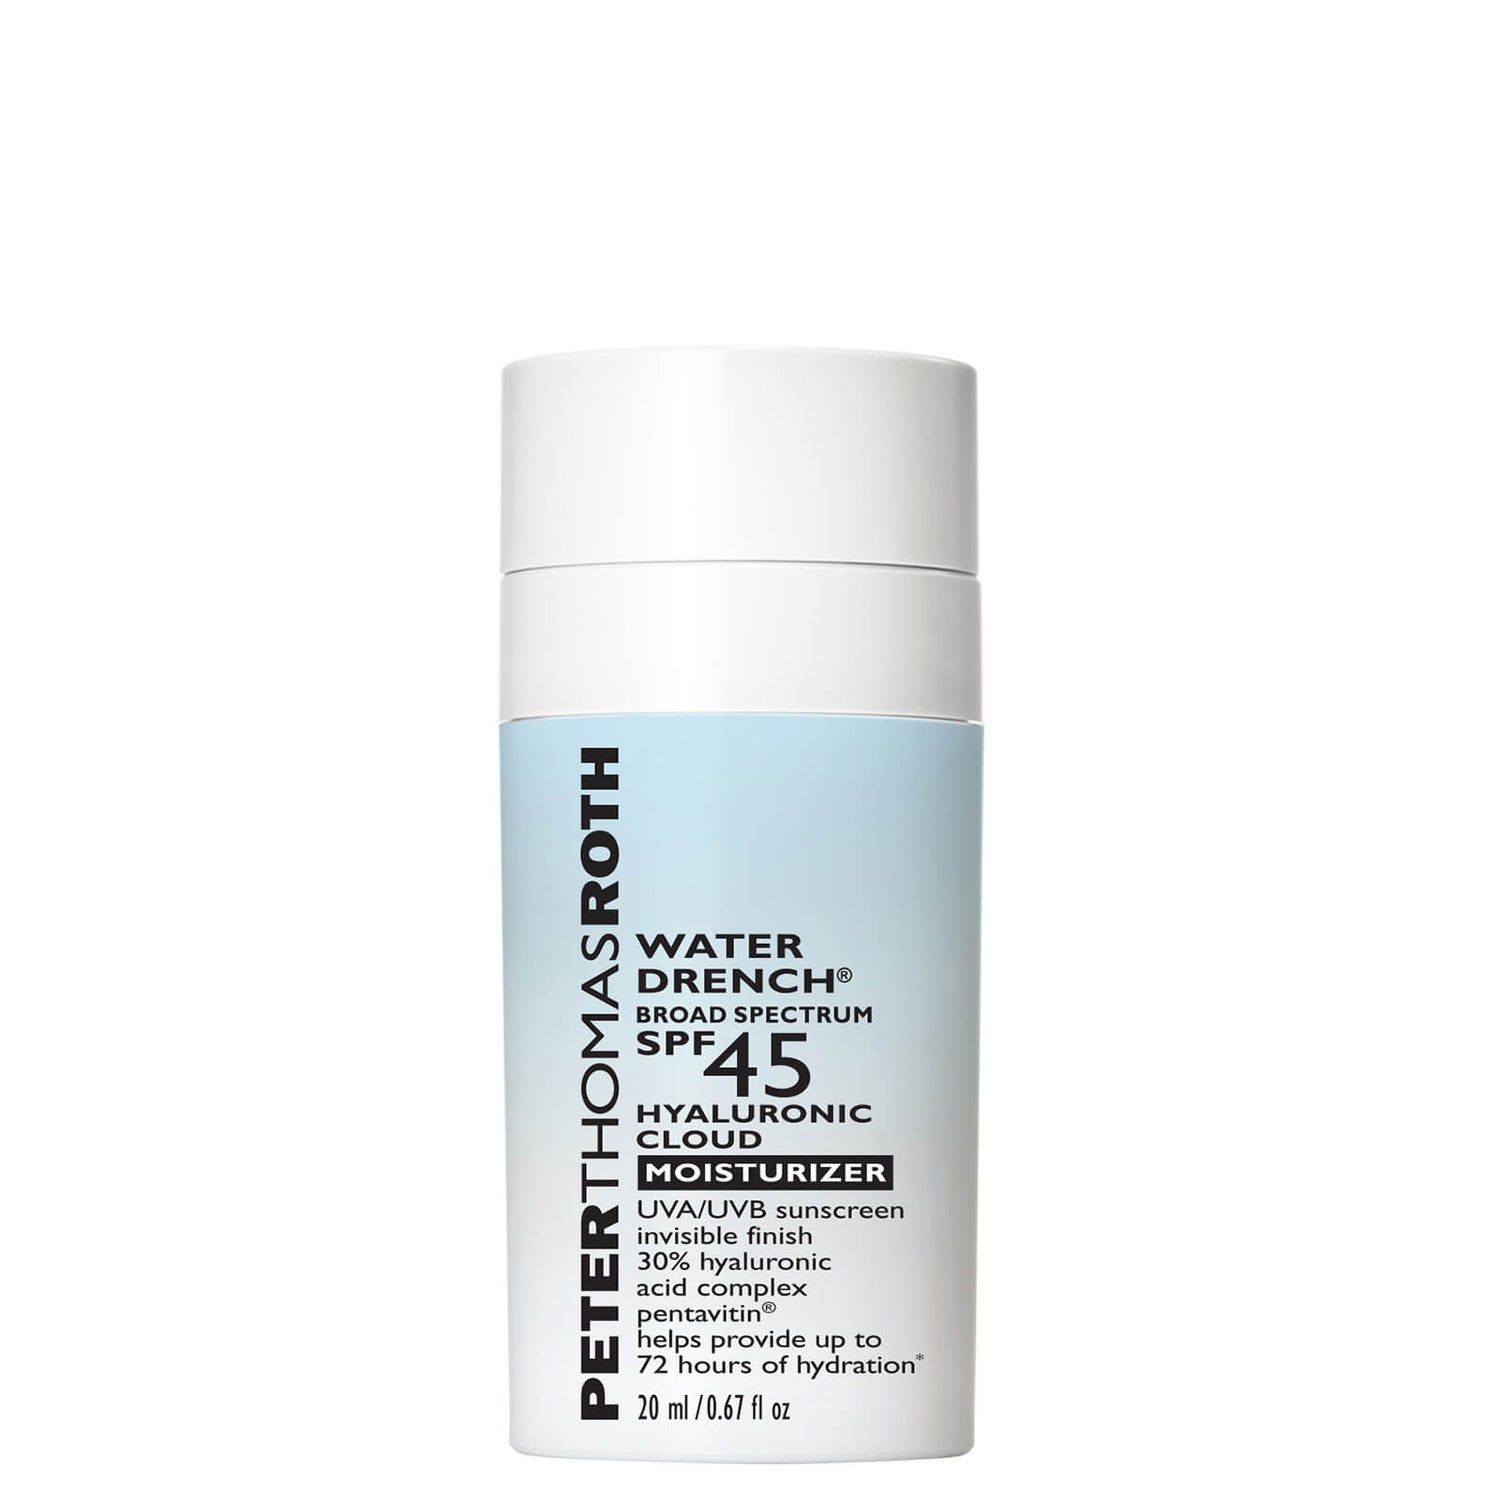 Peter Thomas Roth Water Drench Hyaluronic Cloud Moisturiser Travel Size SPF45 20ml